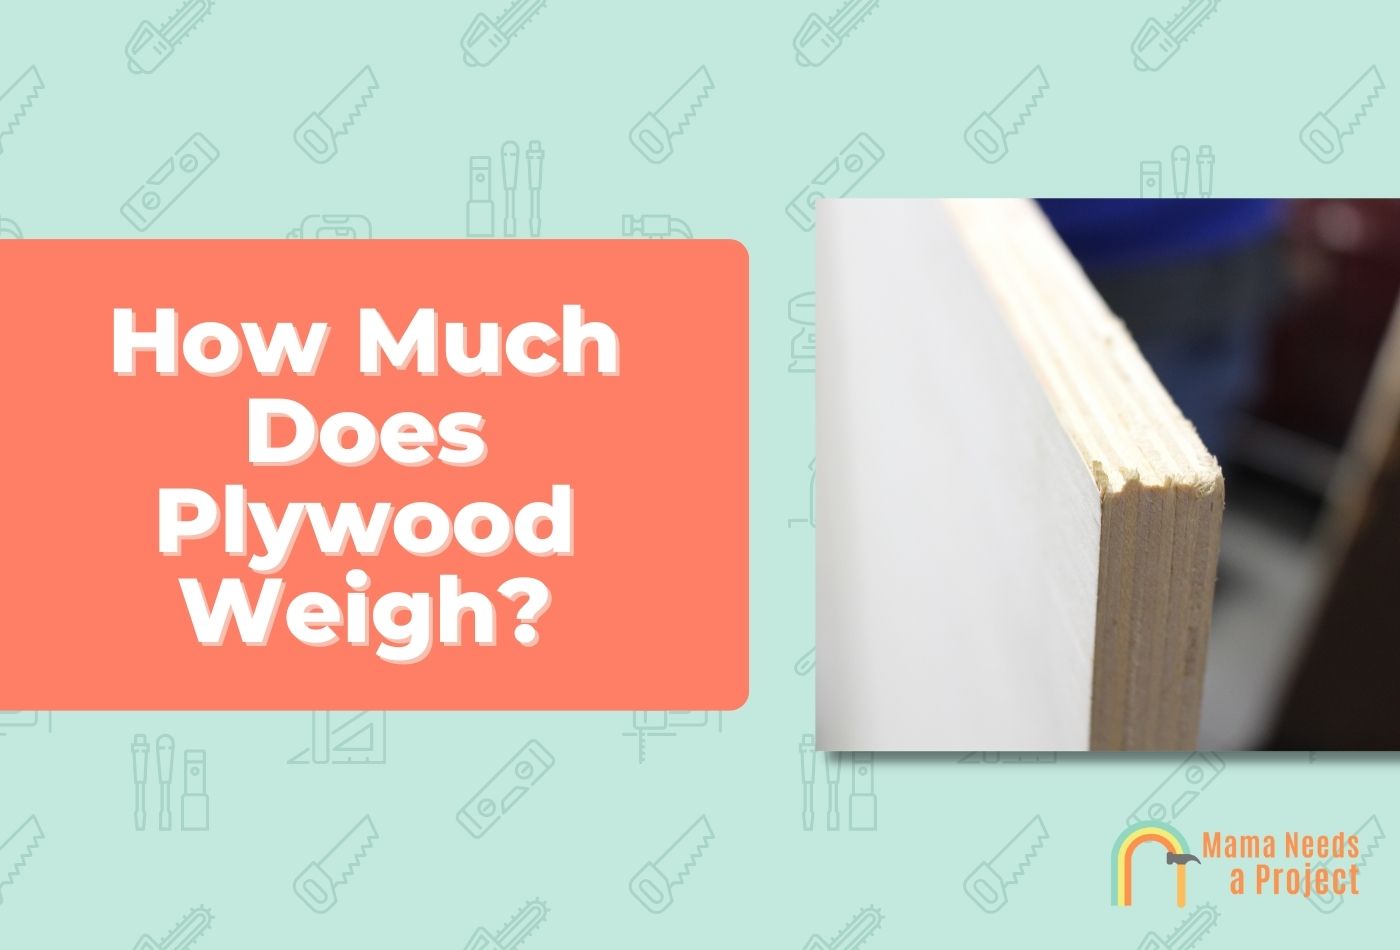 How Much Does Plywood Weigh